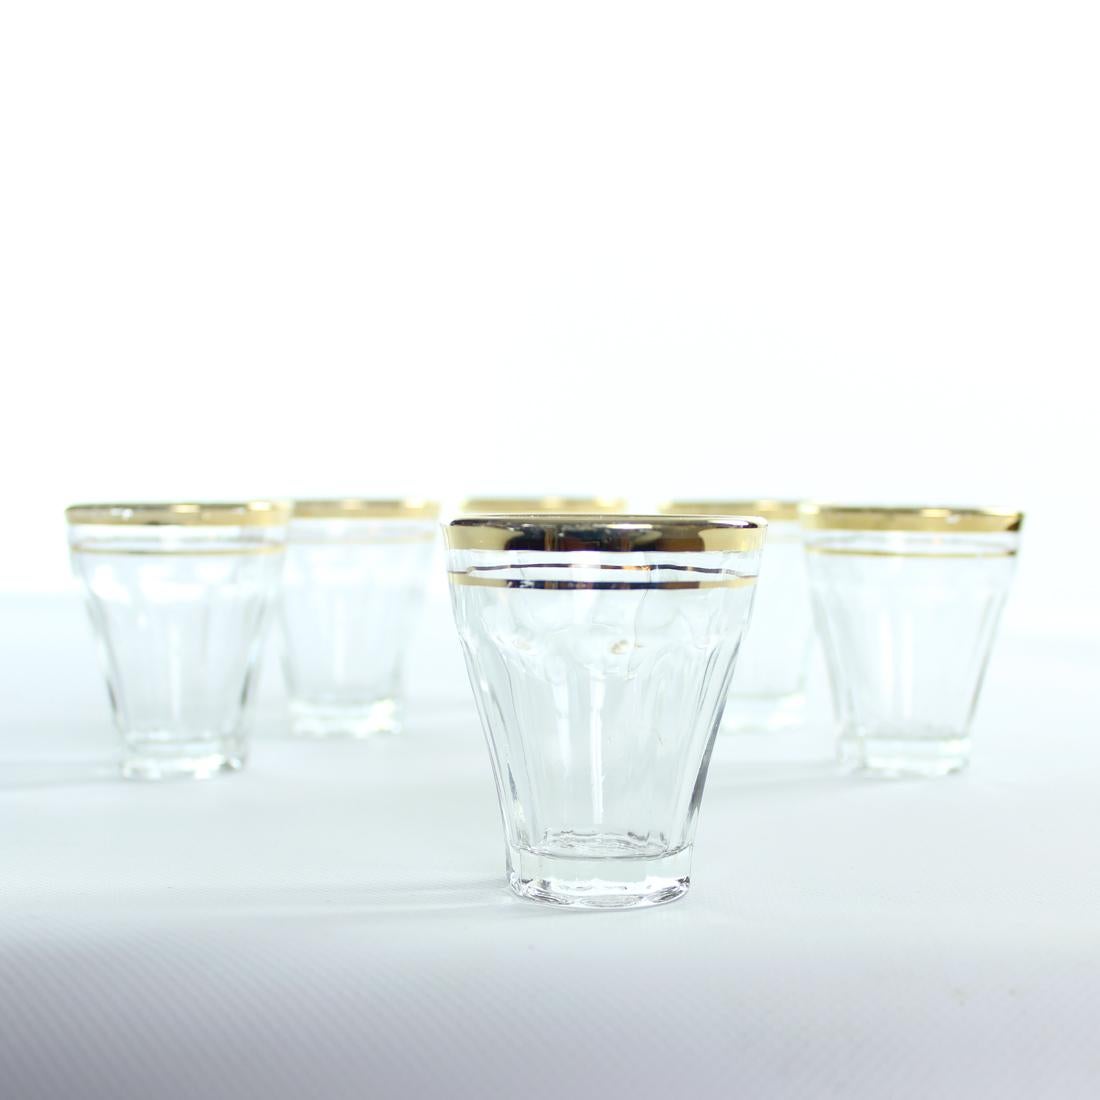 Mid-20th Century Vintage Drinking Glasses With Gold Rim, Set Of 6, Czechoslovakia 1960s For Sale